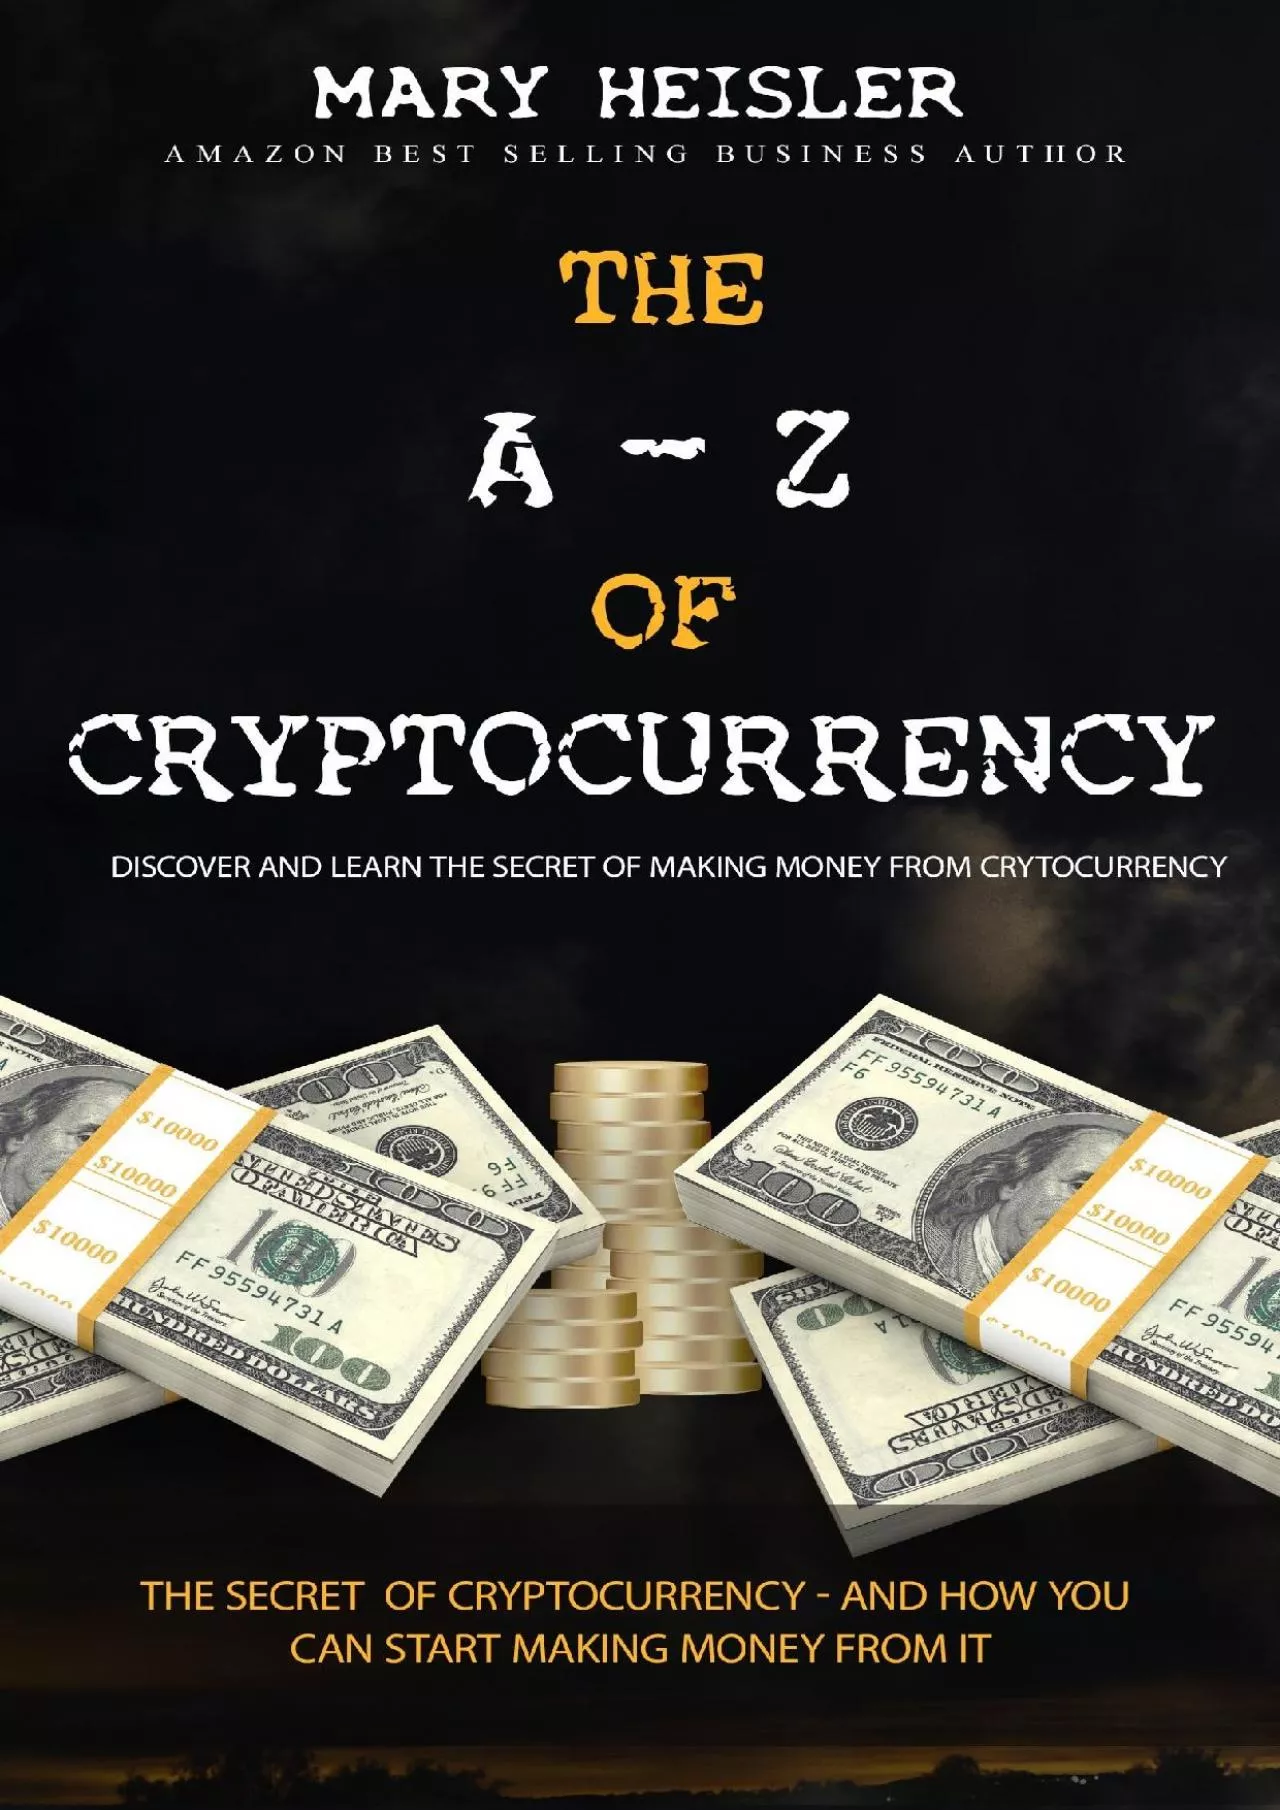 (BOOS)-The A – Z OF CRYPTOCURRENCY: THE SECRET OF CYRPTOCURRENCY - AND HOW YOU CAN START